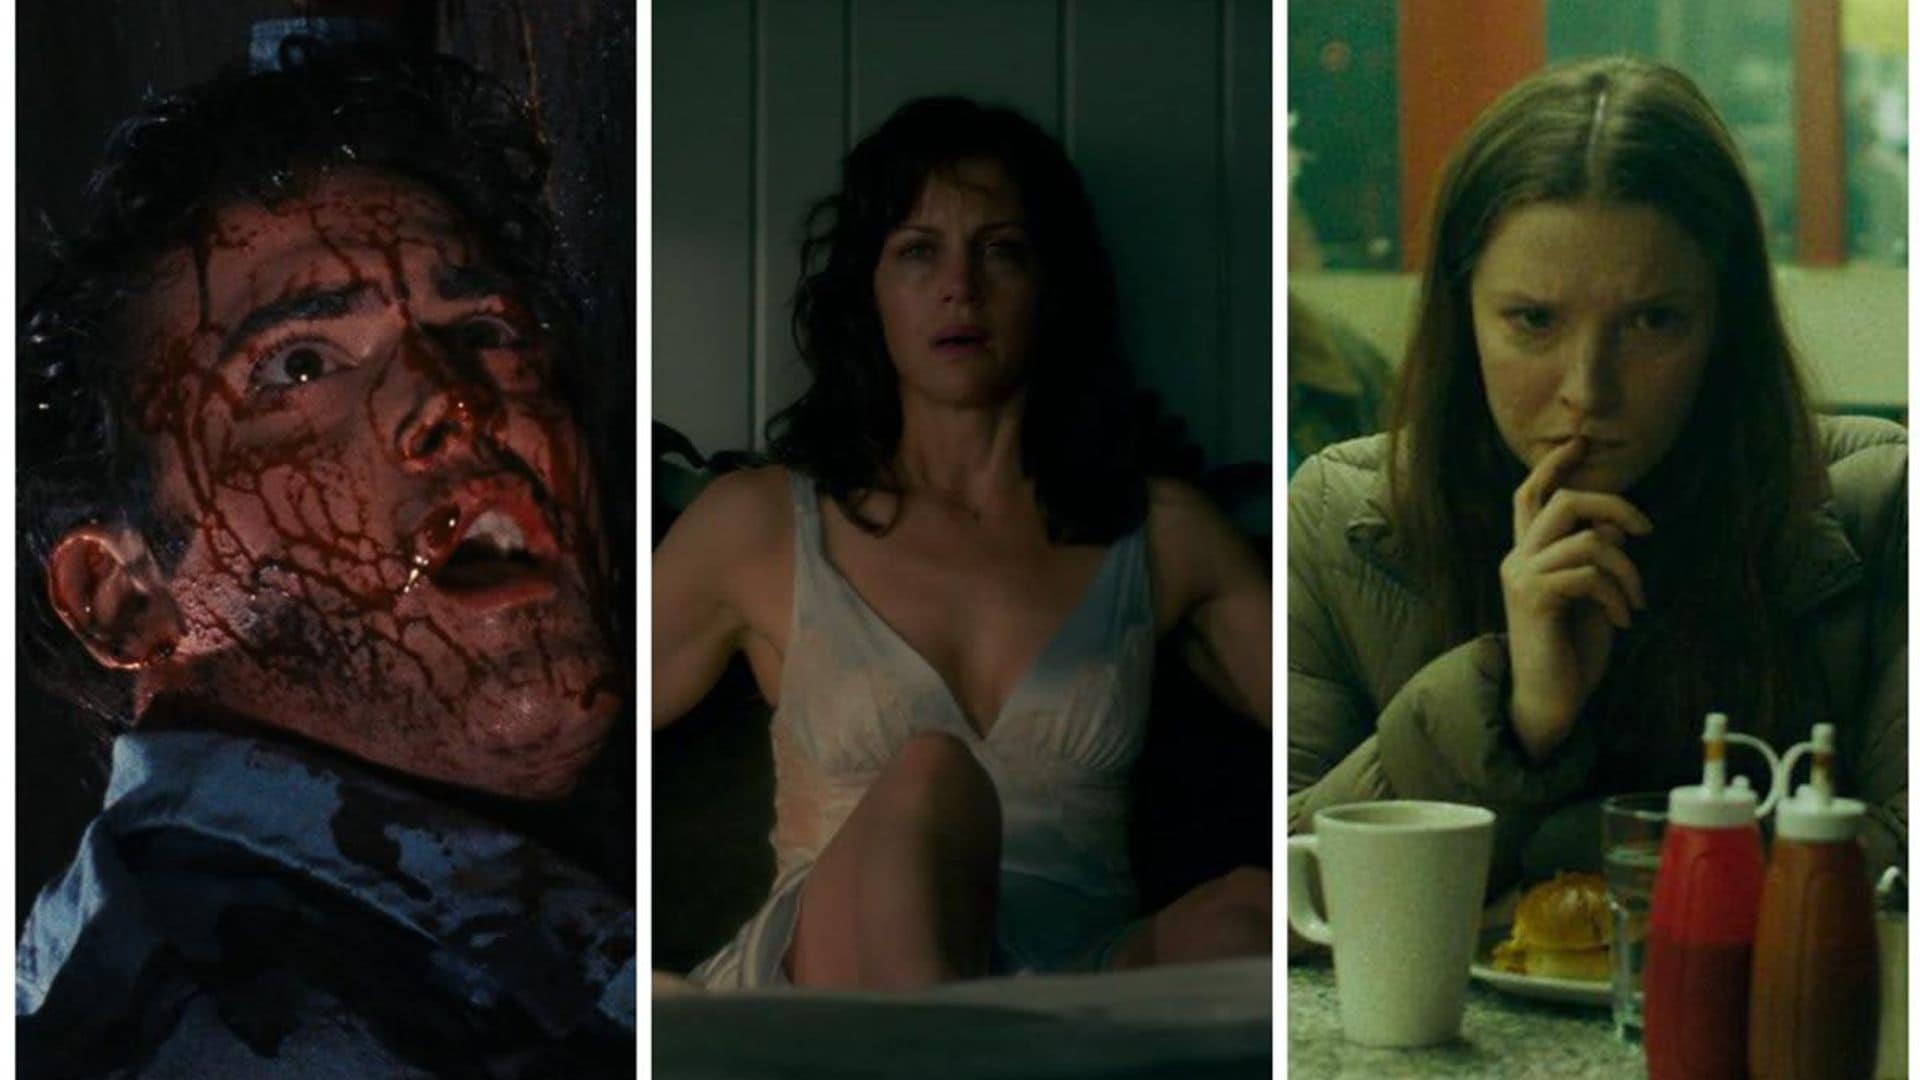 6 horror movies to stream this Halloween